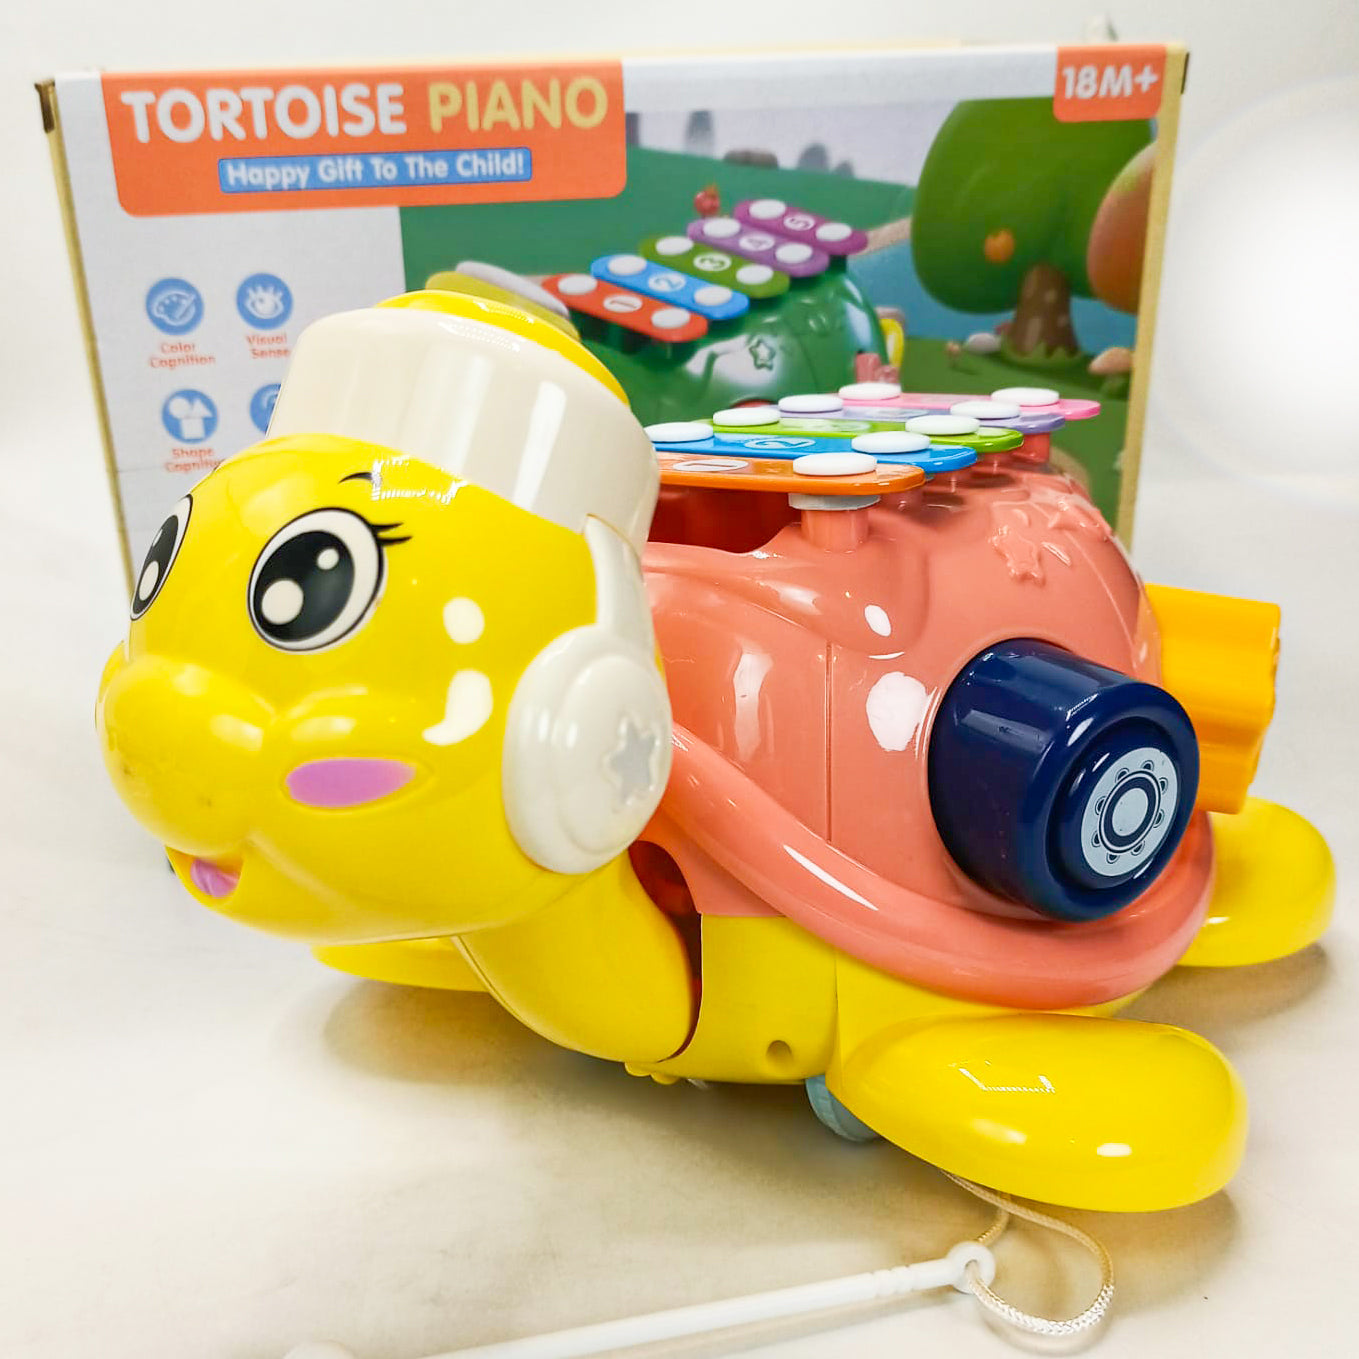 Fun and Educational Tortoise Swing Piano For Toddlers